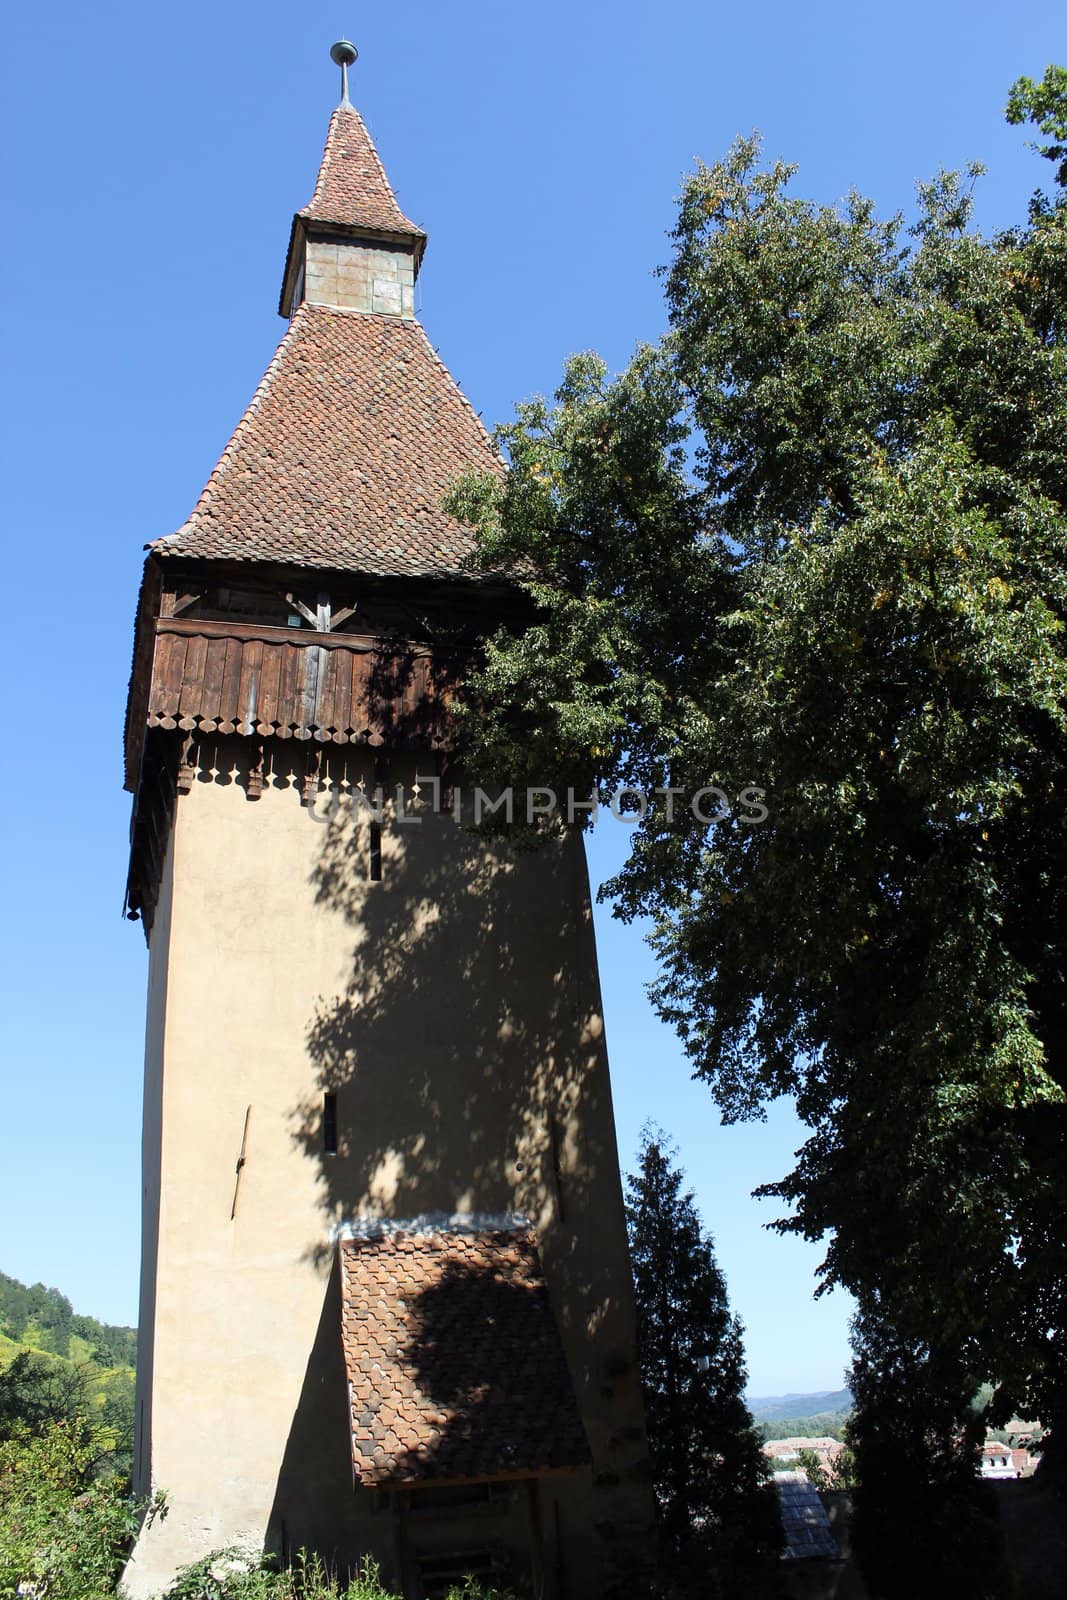 The tower of Biertan by Lirch